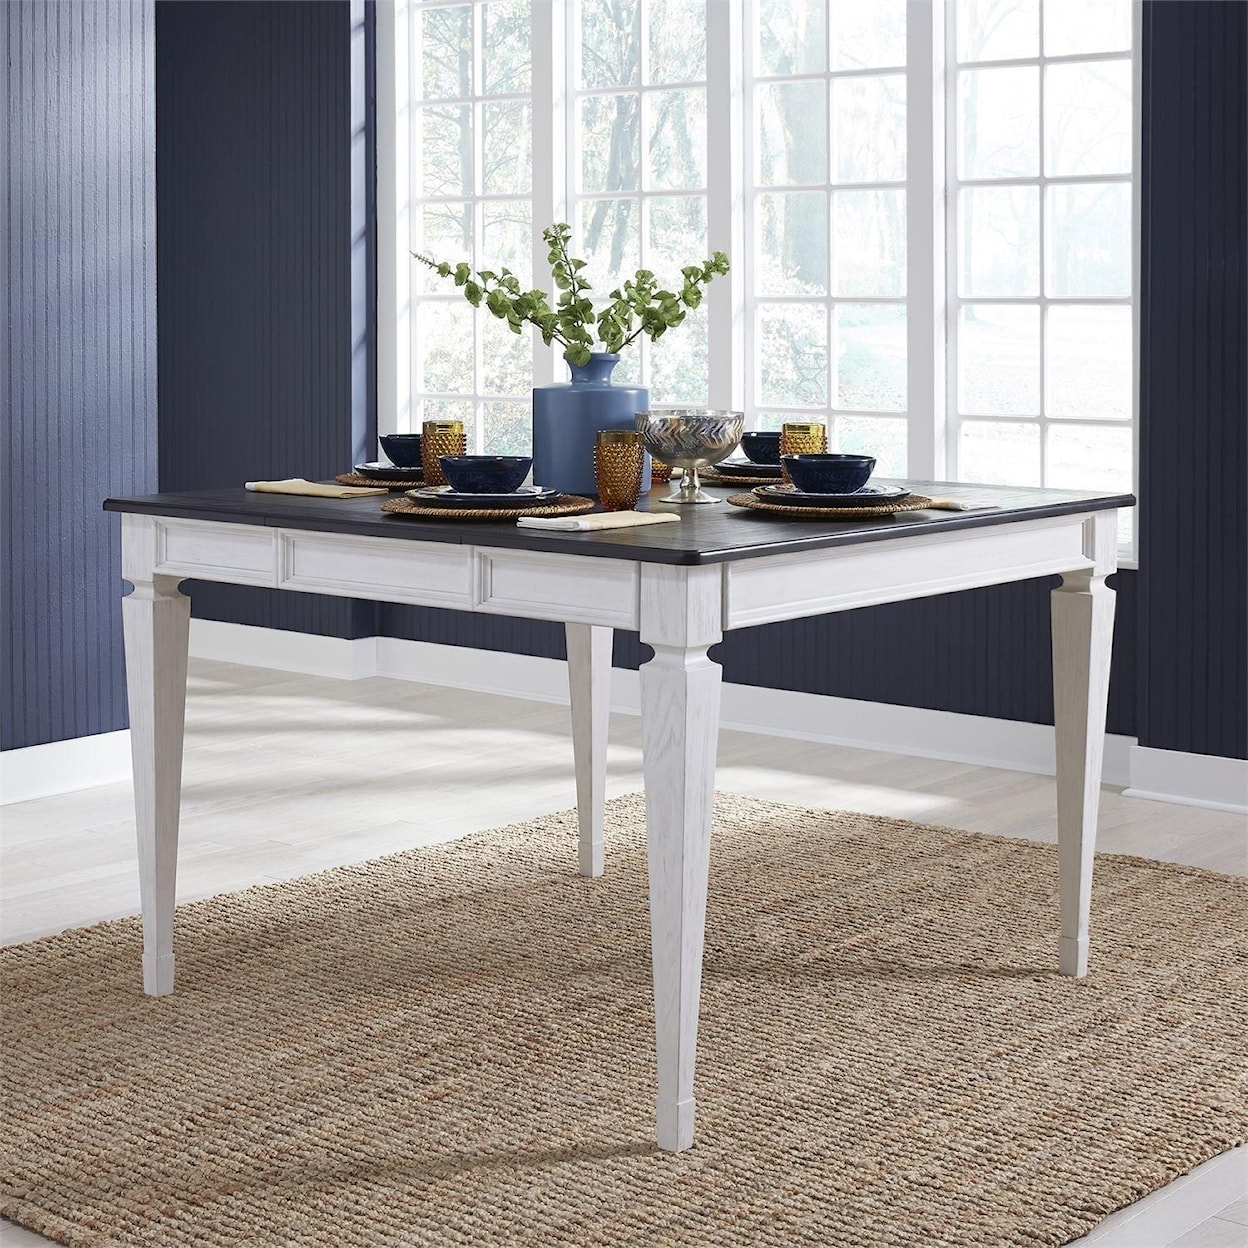 Libby Allyson Park Counter Height Dining Table